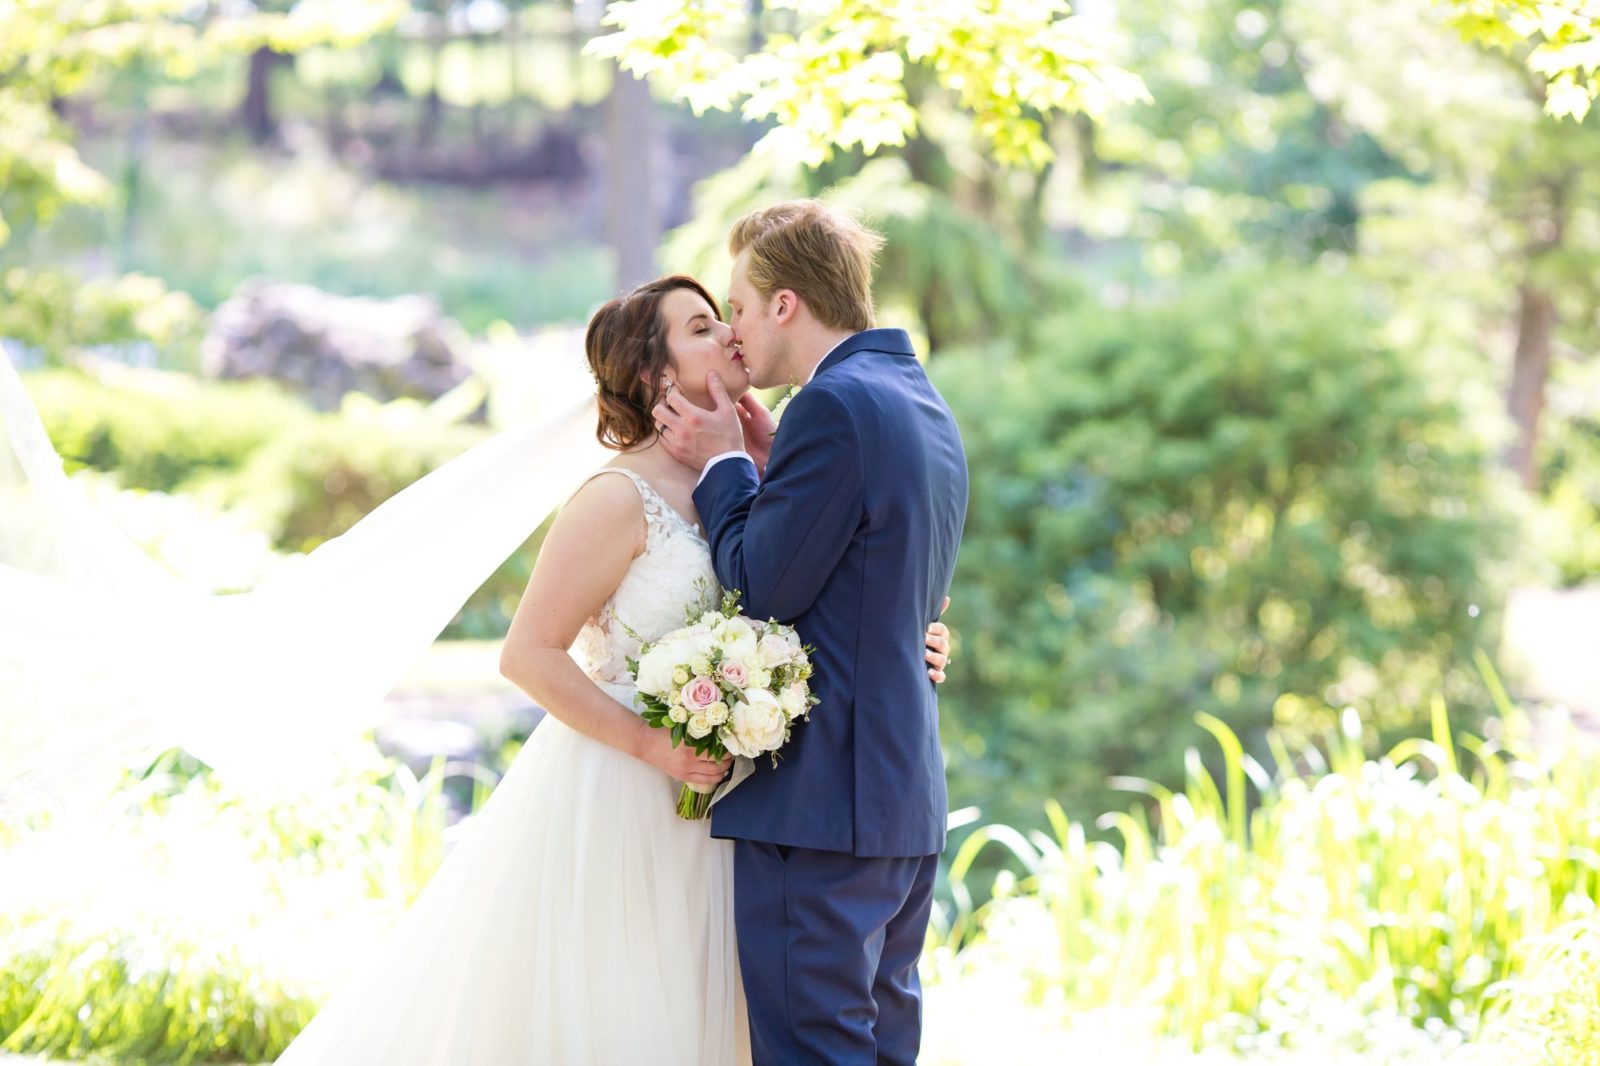 A posed image of a bride and groom kissing at Fabyan Japanese Garden